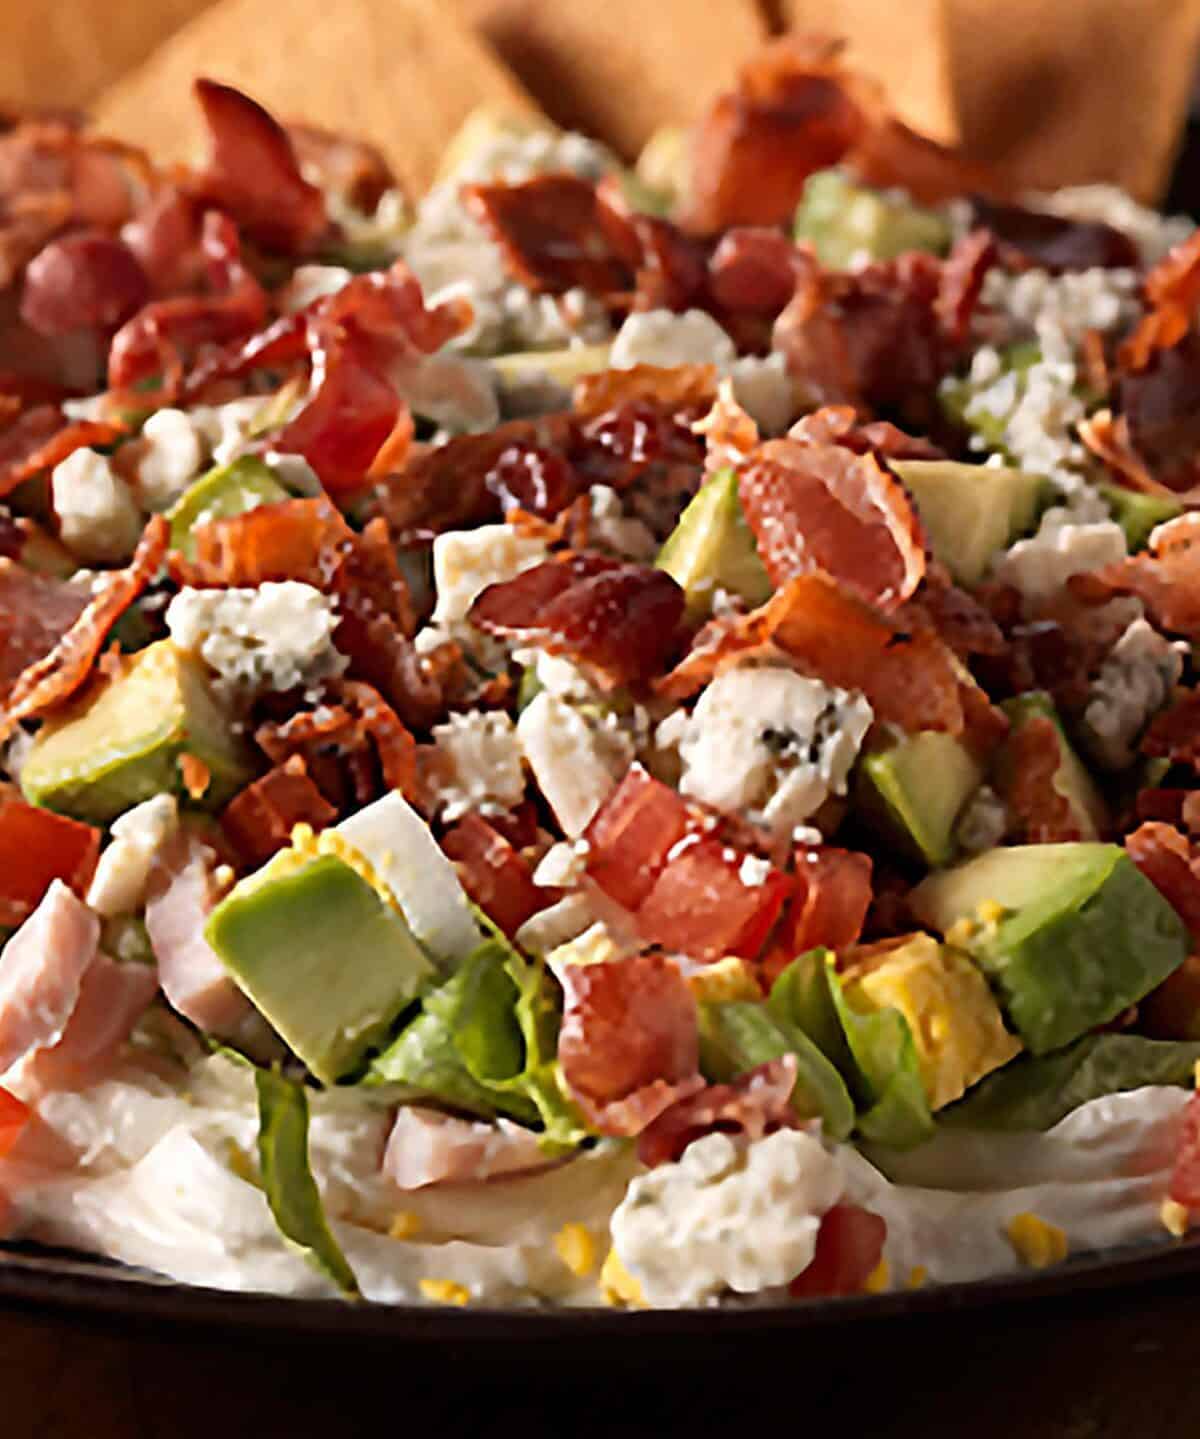  Get your party started with a quick and easy to make Cobb Salad Dip!